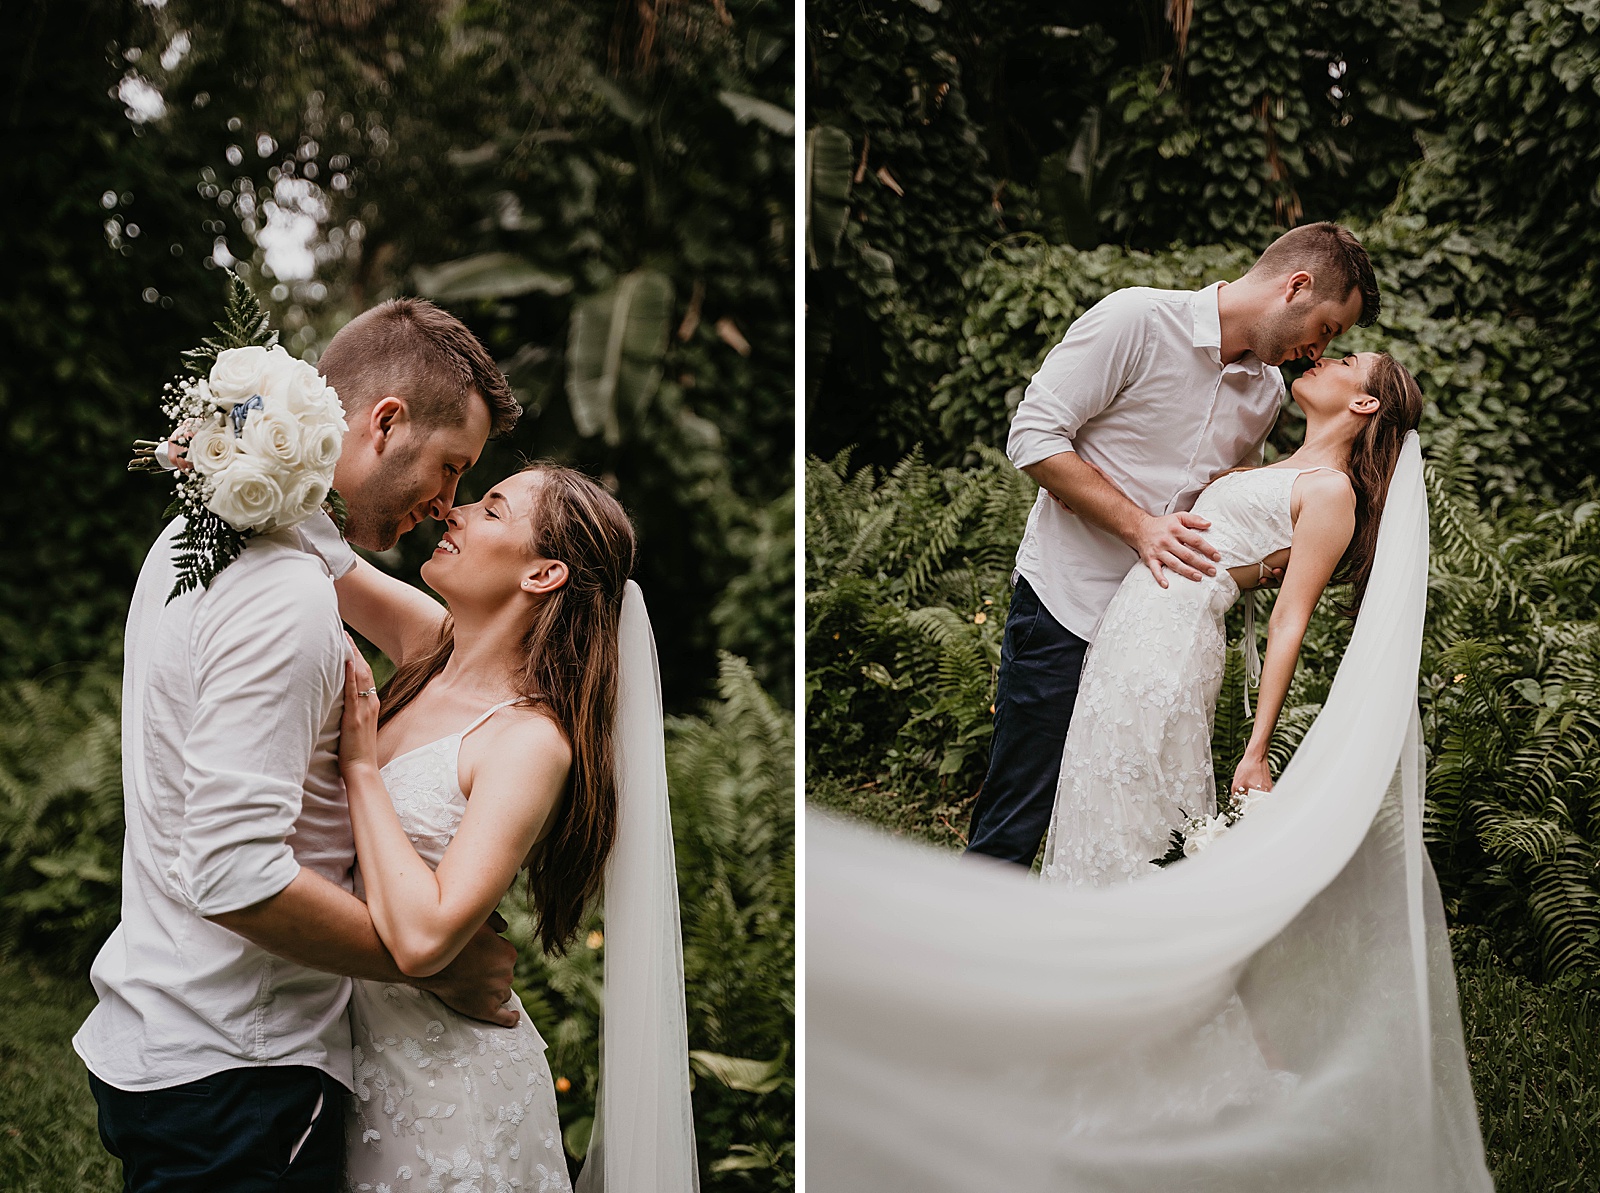 Intimate Fort Lauderdale Elopement Bride and Groom Portrait in front of greenery captured by South Florida Elopement Photographer, Krystal Capone Photography